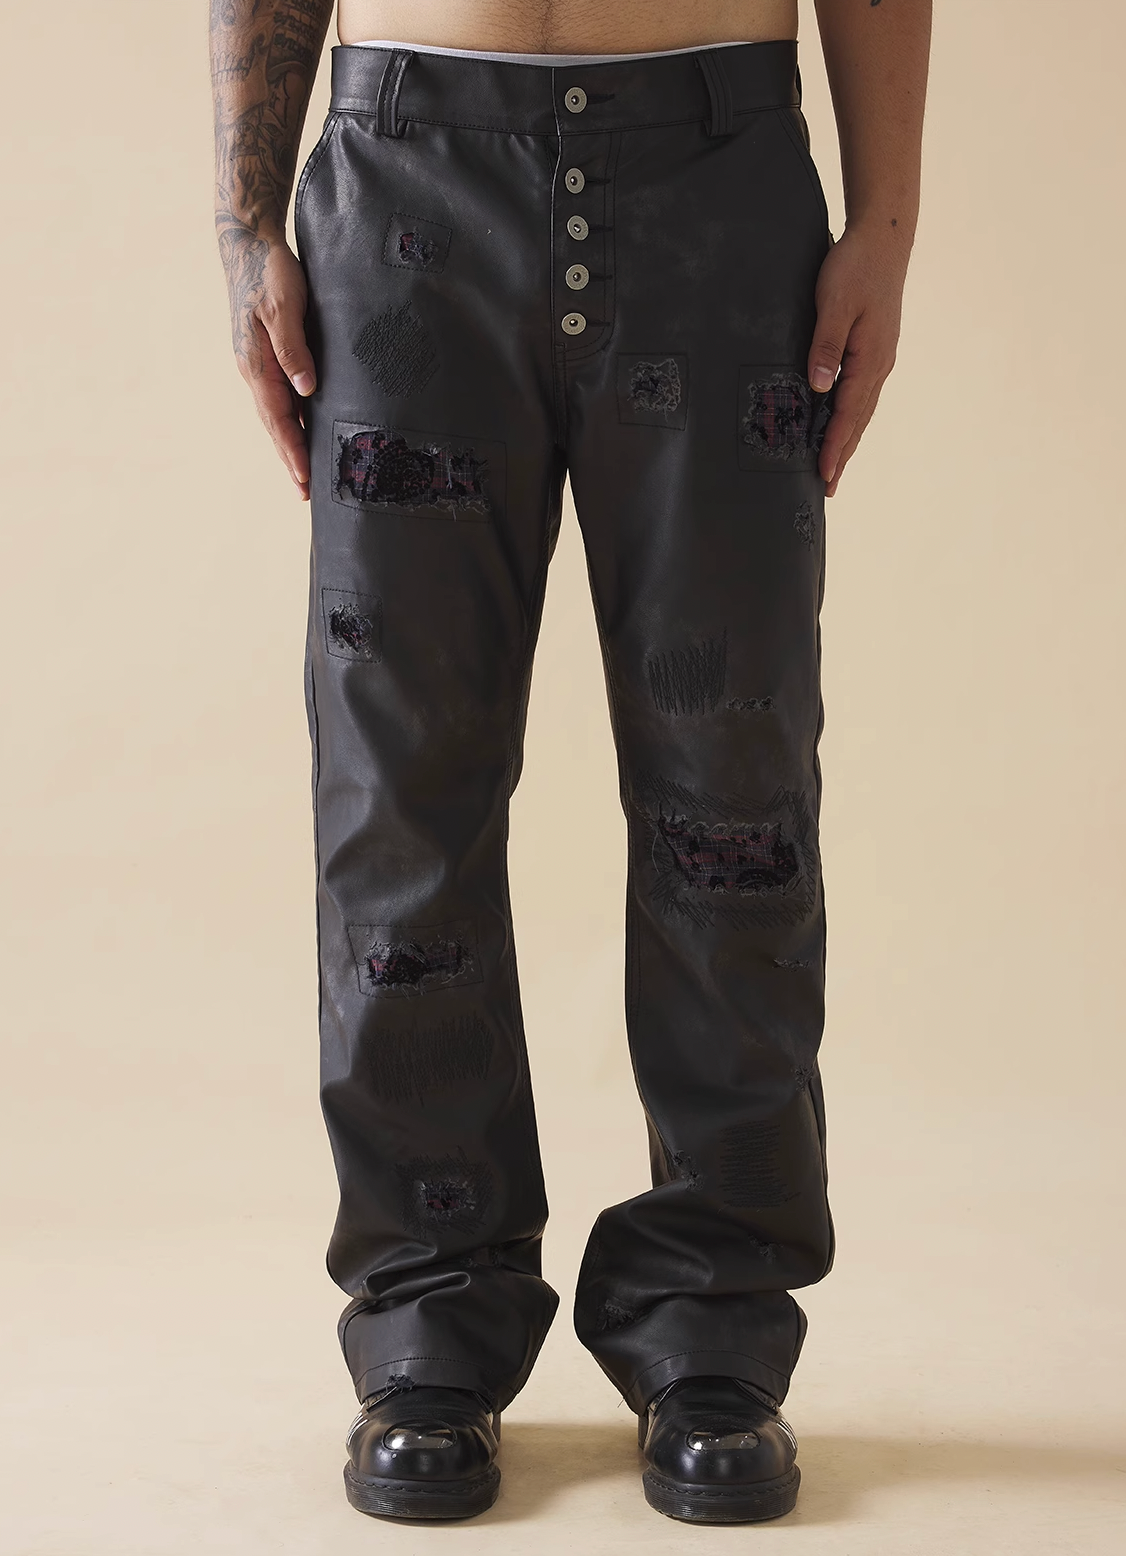 EVILKNIGHT(EK) Plaid Patch Rice Grains Embroidery Washed Leather Pants